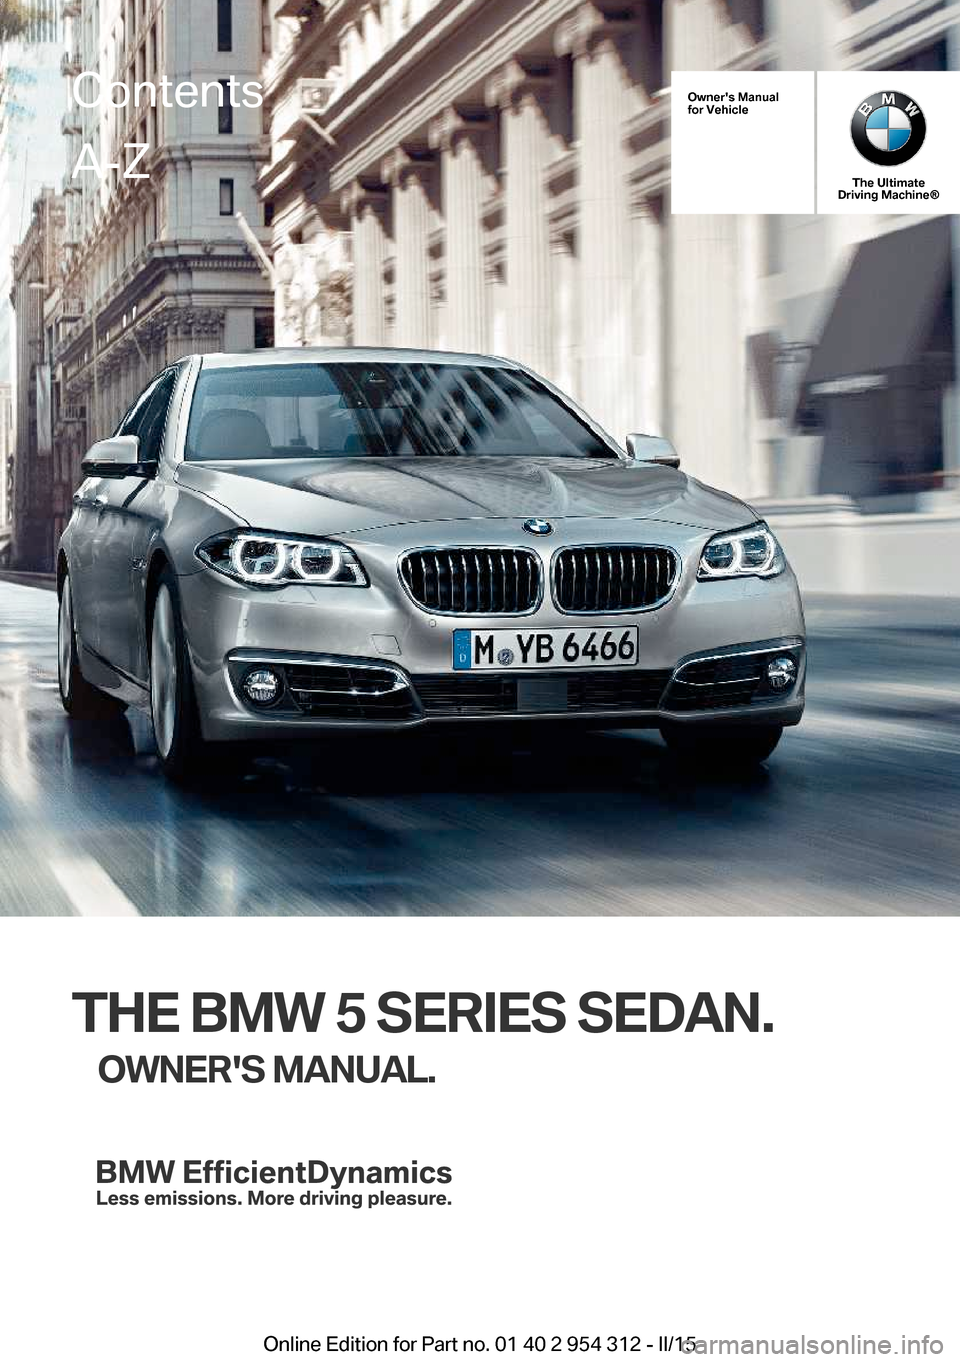 BMW 5 SERIES 2015 F10 Owners Manual Owners Manual
for Vehicle
The Ultimate
Driving Machine®
THE BMW 5 SERIES SEDAN.
OWNERS MANUAL.
ContentsA-Z
Online Edition for Part no. 01 40 2 954 312 - II/15   